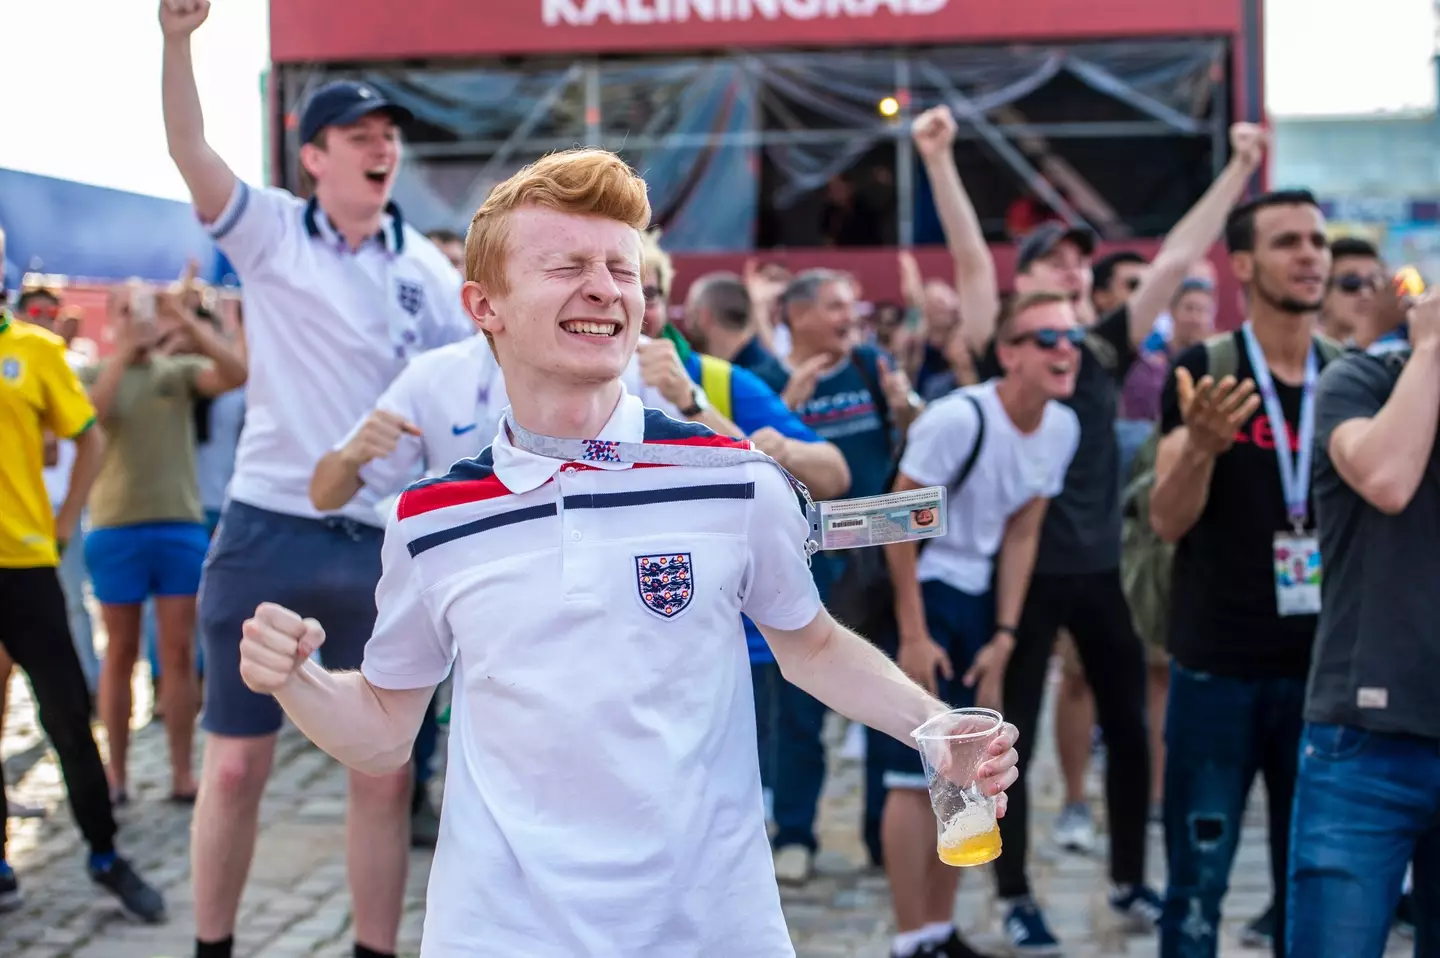 England fans have been urged to share positive thoughts ahead of the team's first match of the World Cup.